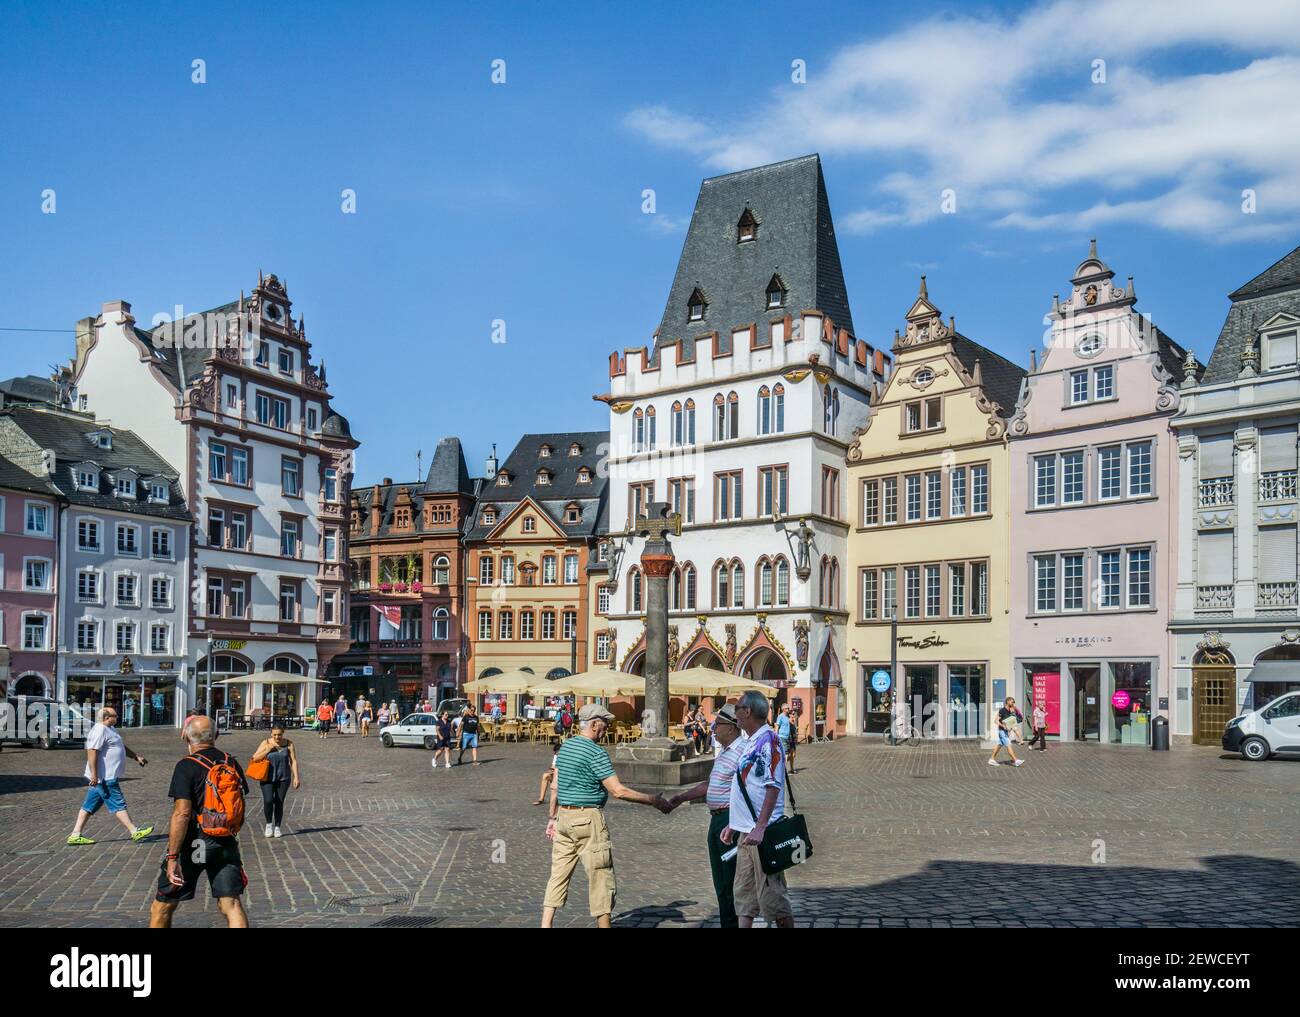 Hauptmarkt the Main Market Square of the ancient city of Trier, with market cross against the backdrop of house facades from the Renaissance, Baroque, Stock Photo